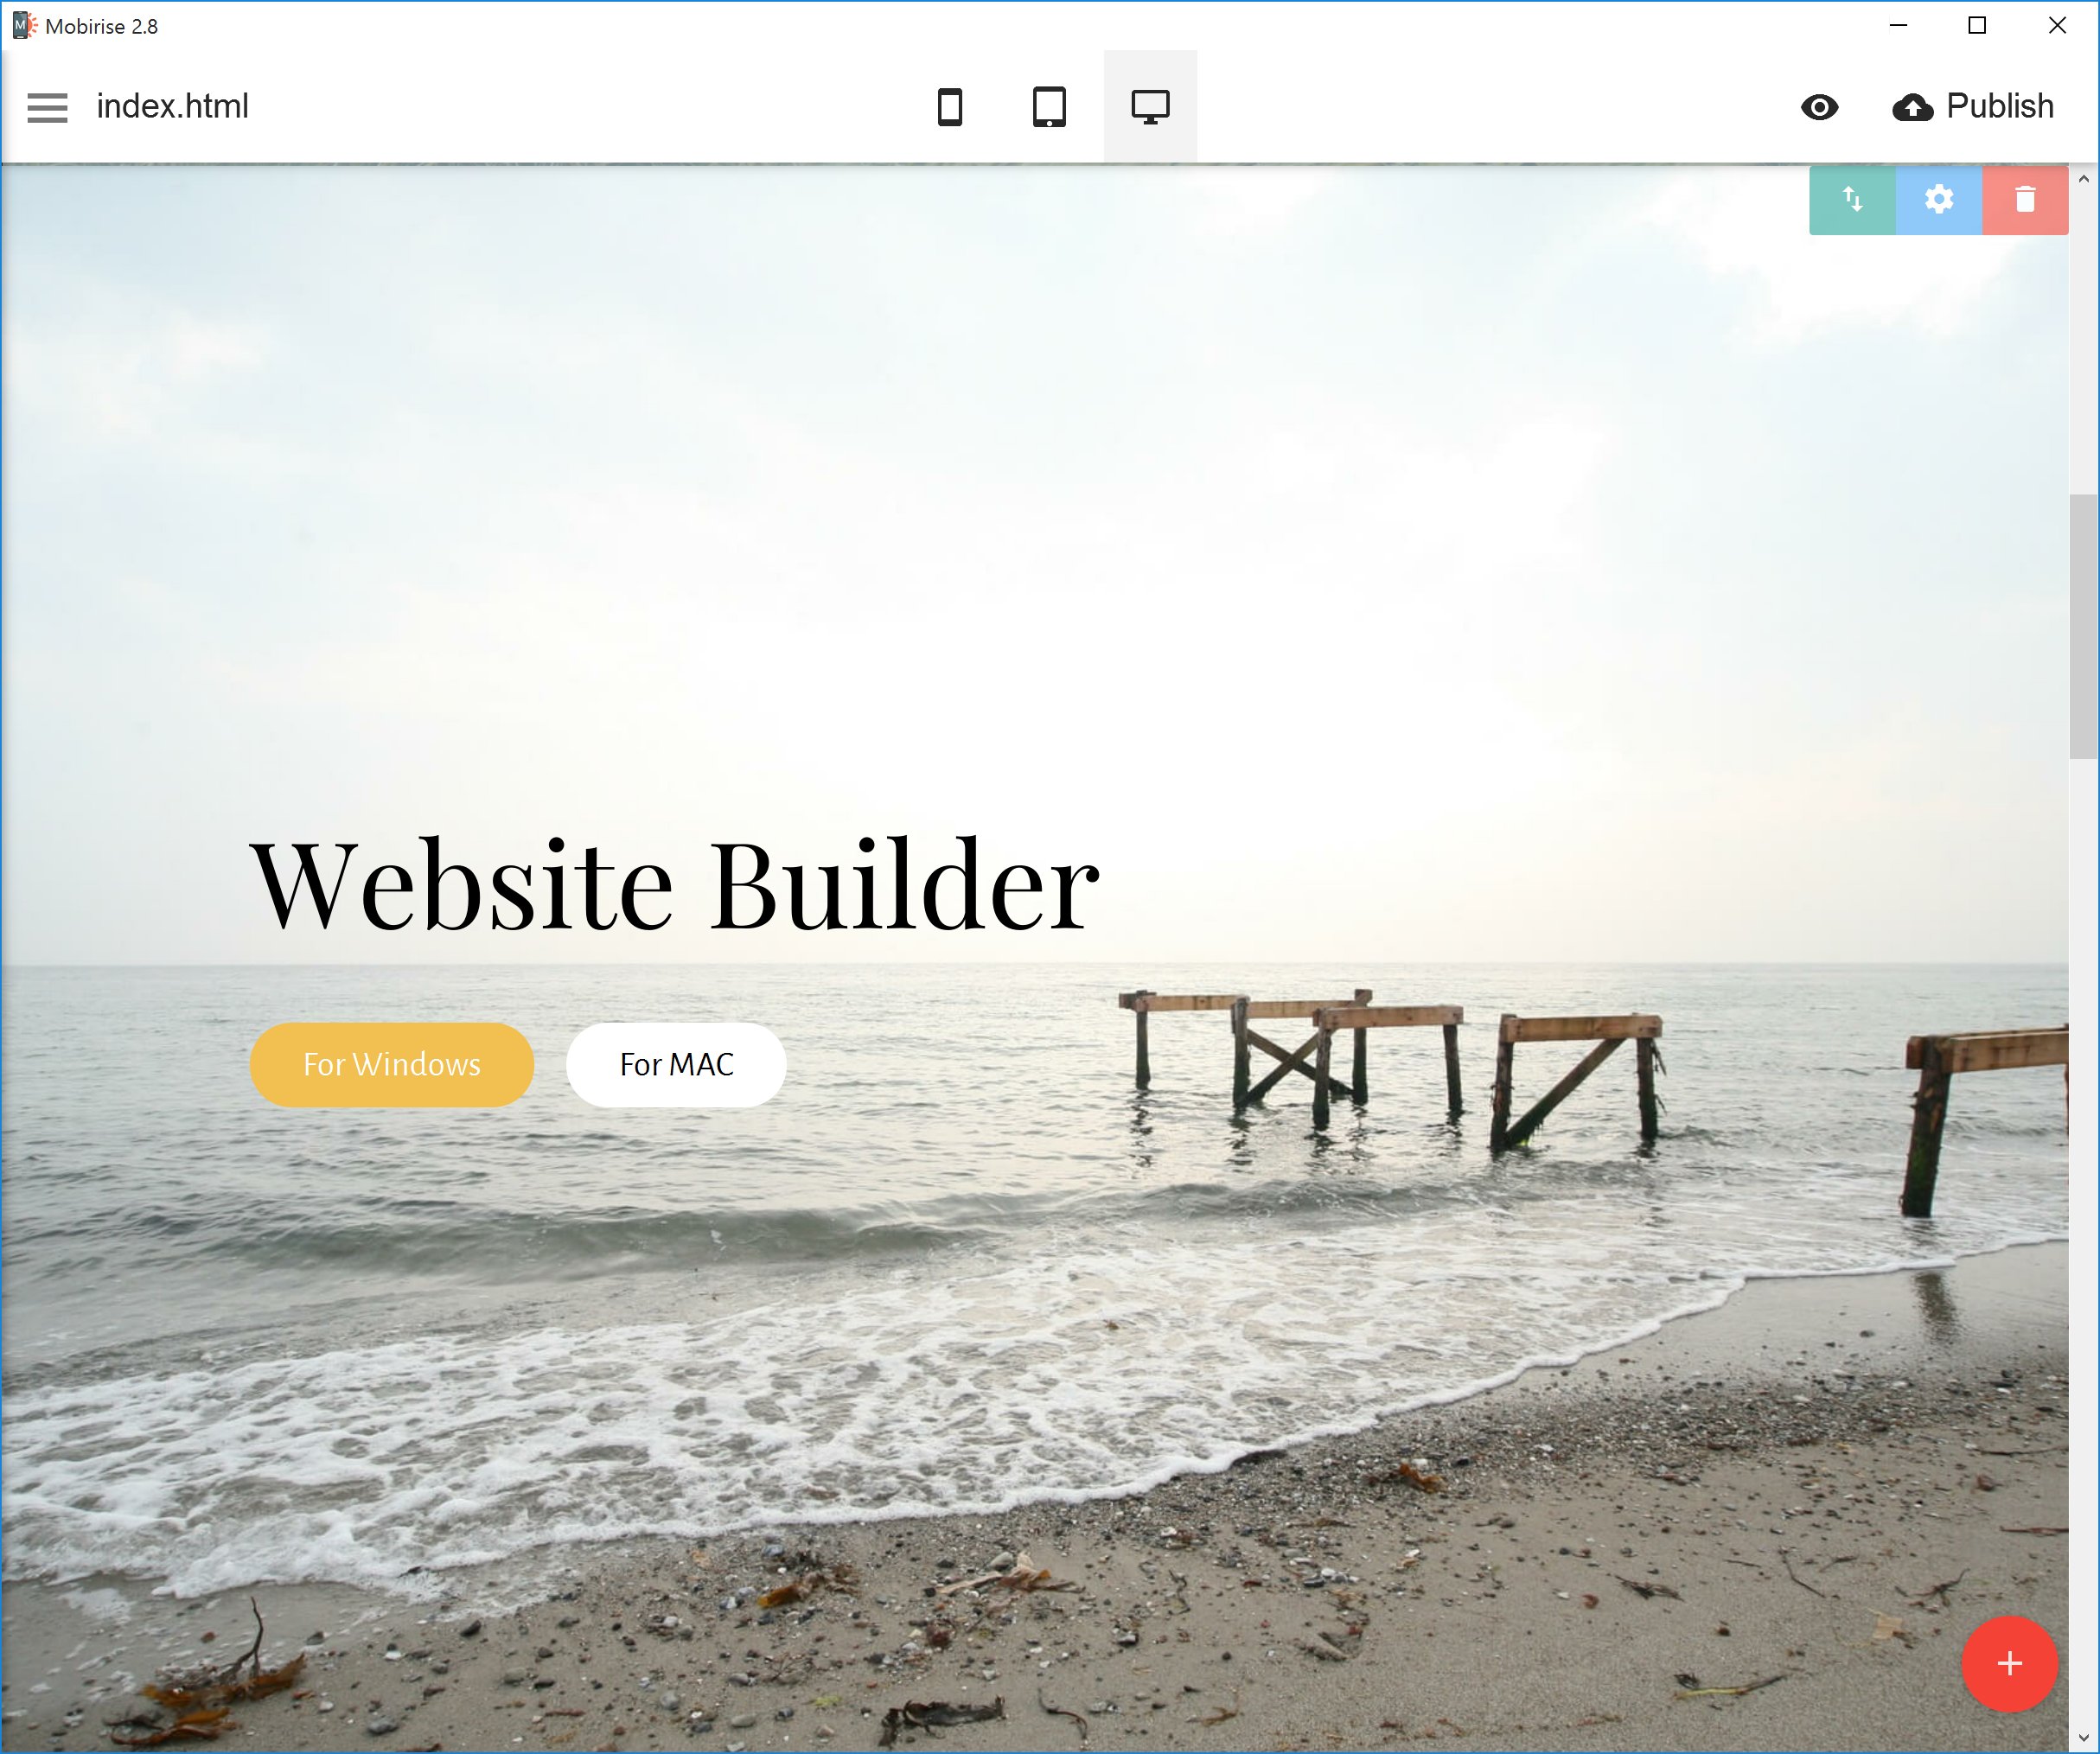 How to Create Your Own Site in HTML5